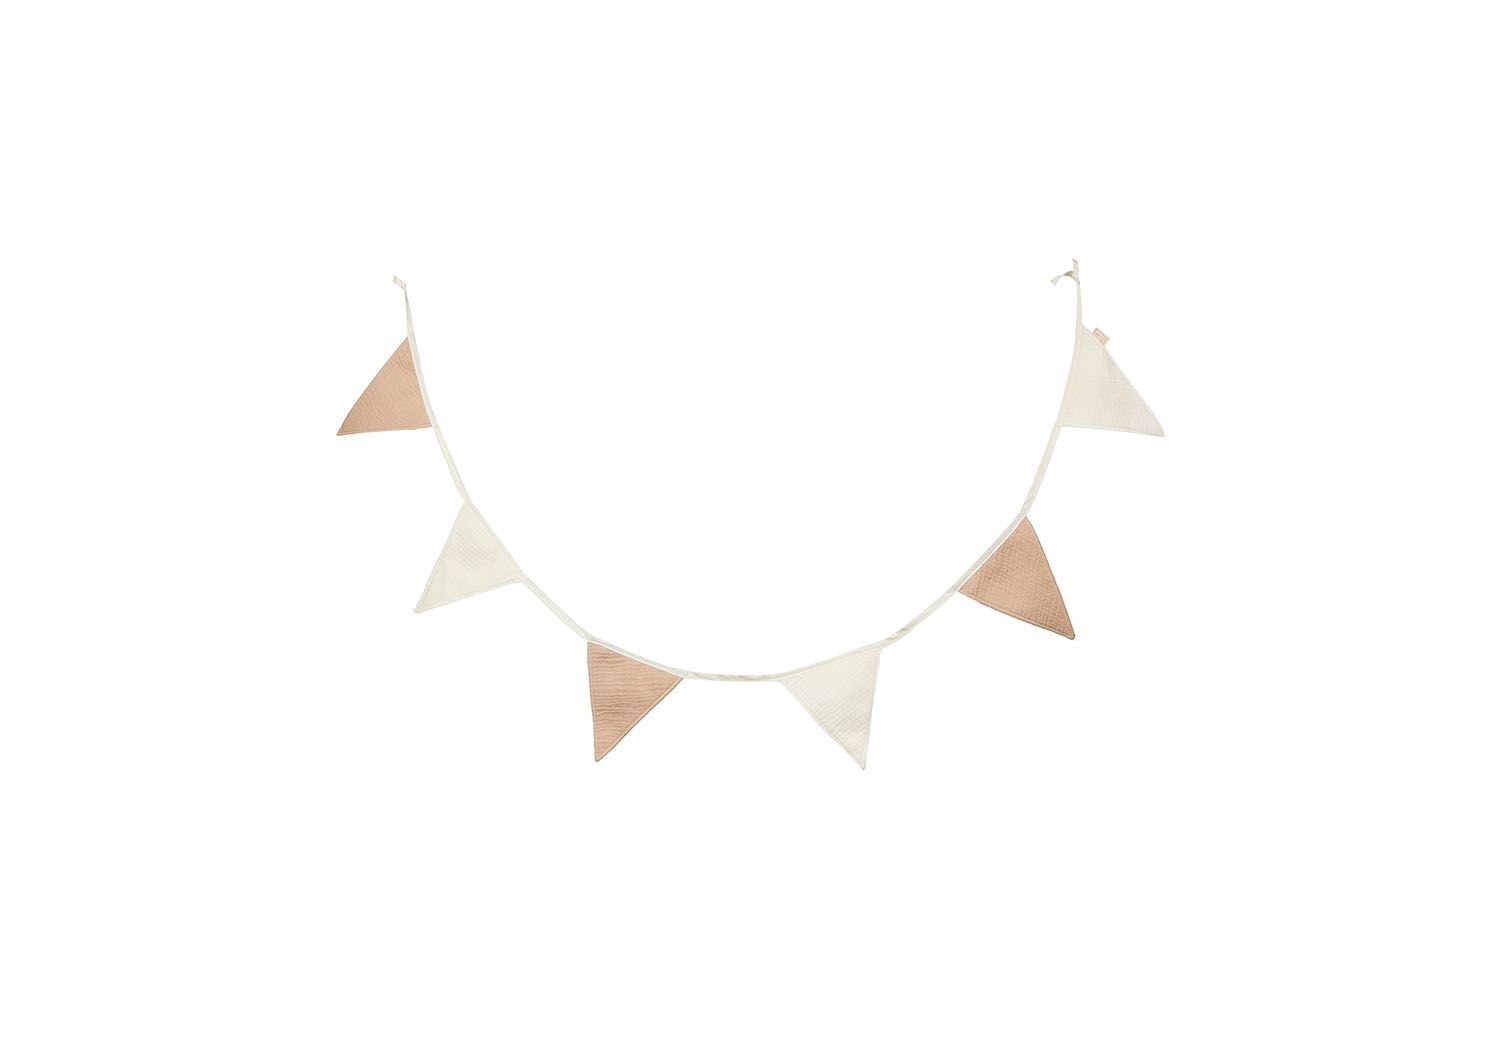 Wimpelkette biscuit / ivory